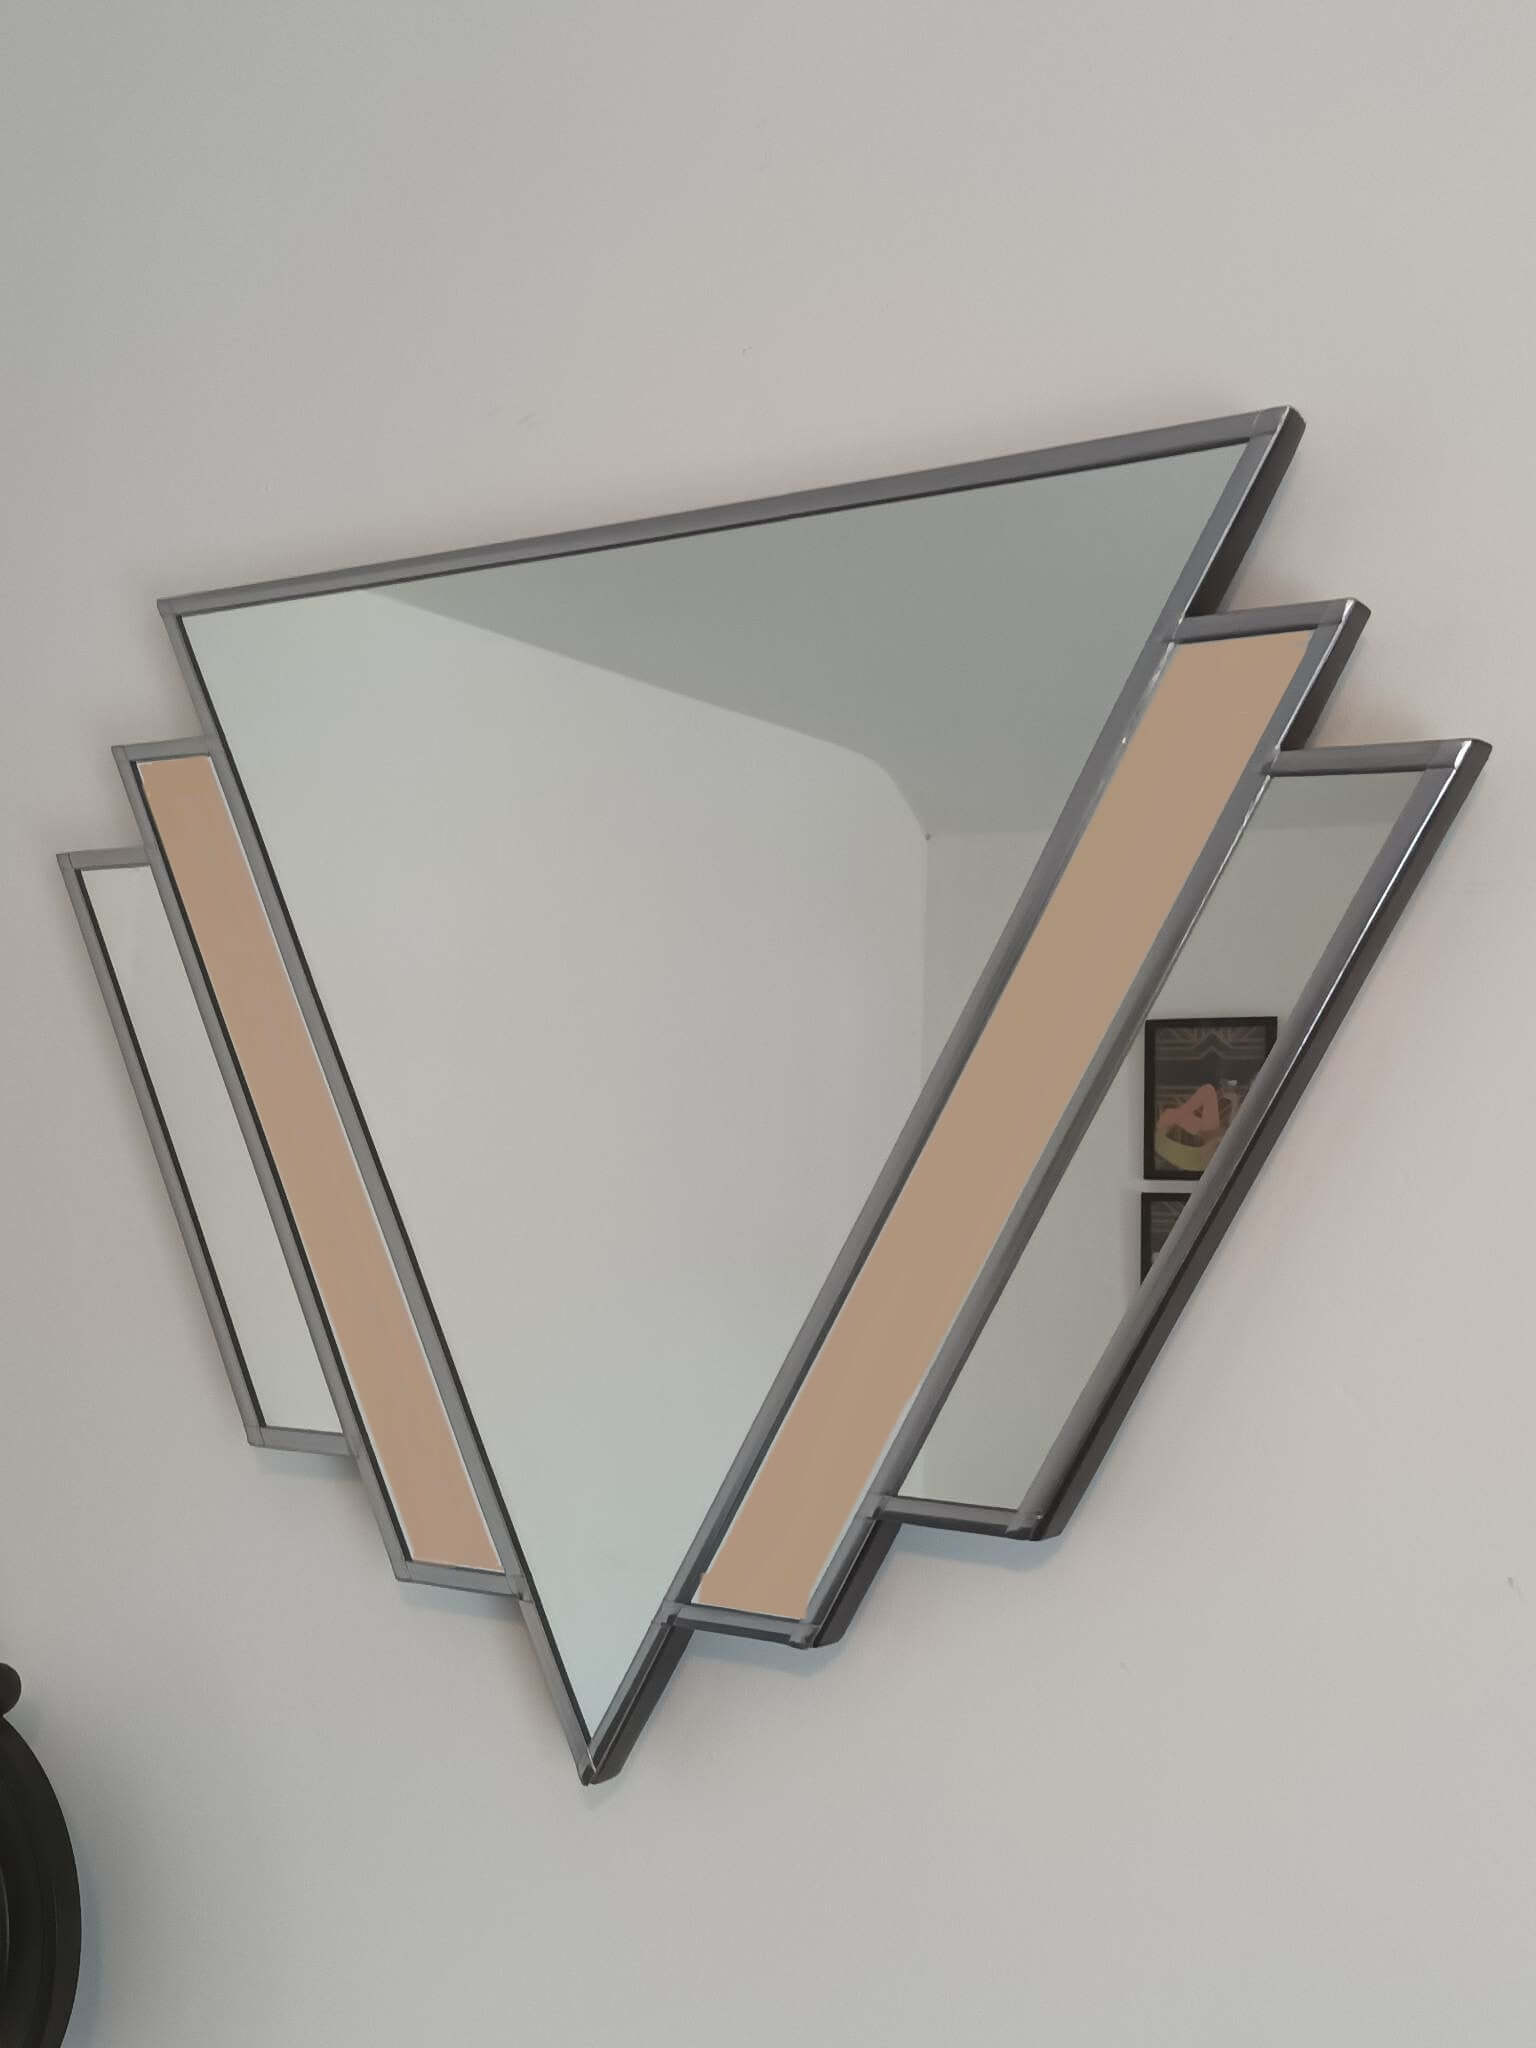 Silver art deco wall mirror with bronze tinted glass